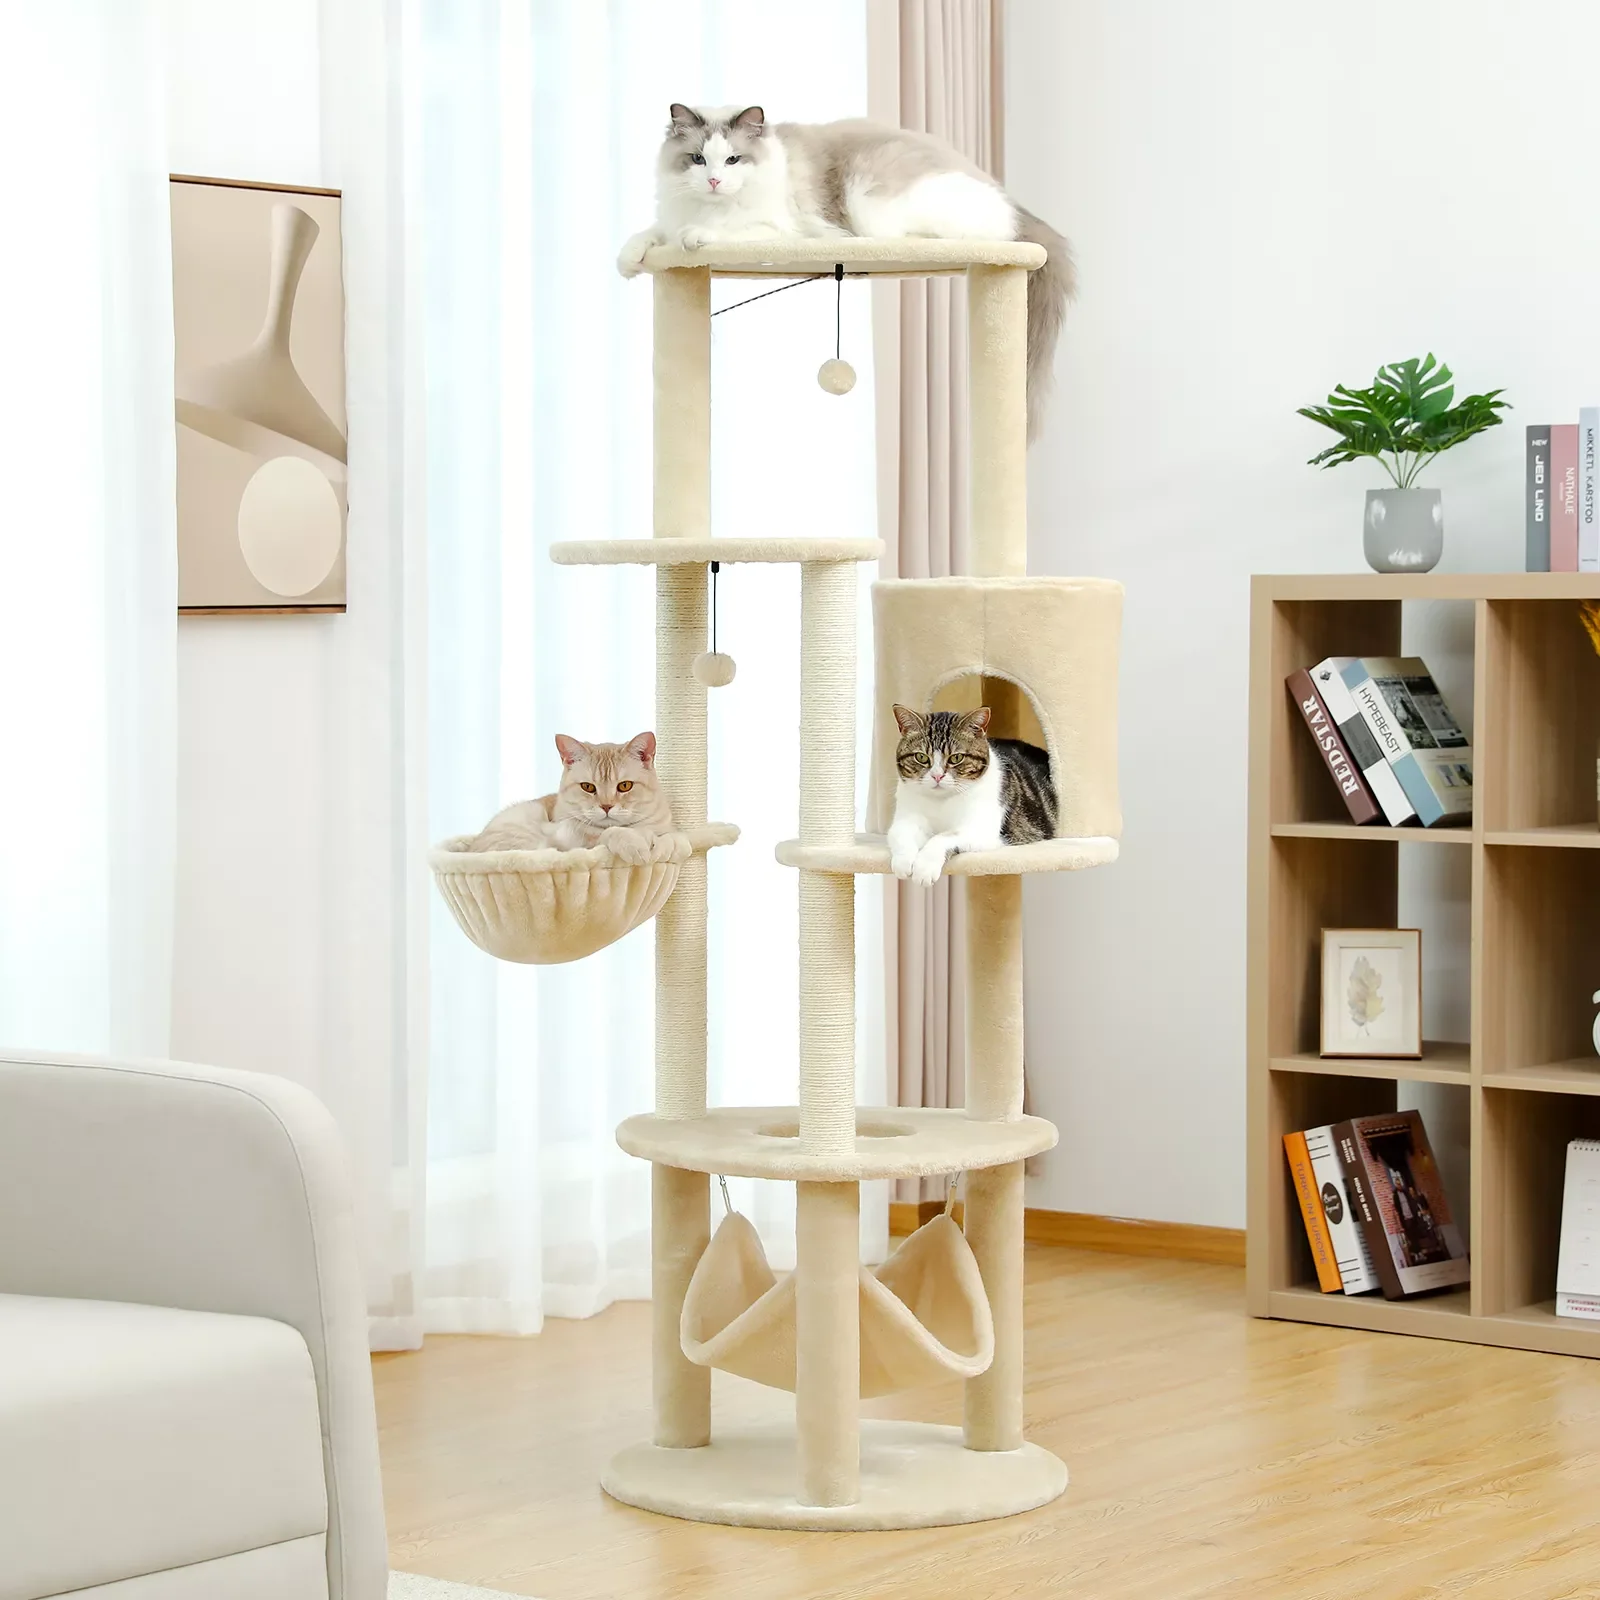 NEW Multi-Functional Cat Tree Tall Cat Tower for Indoor Cats with Cozy Hammock Scratching Post and Soft Condo for Medium and Kit